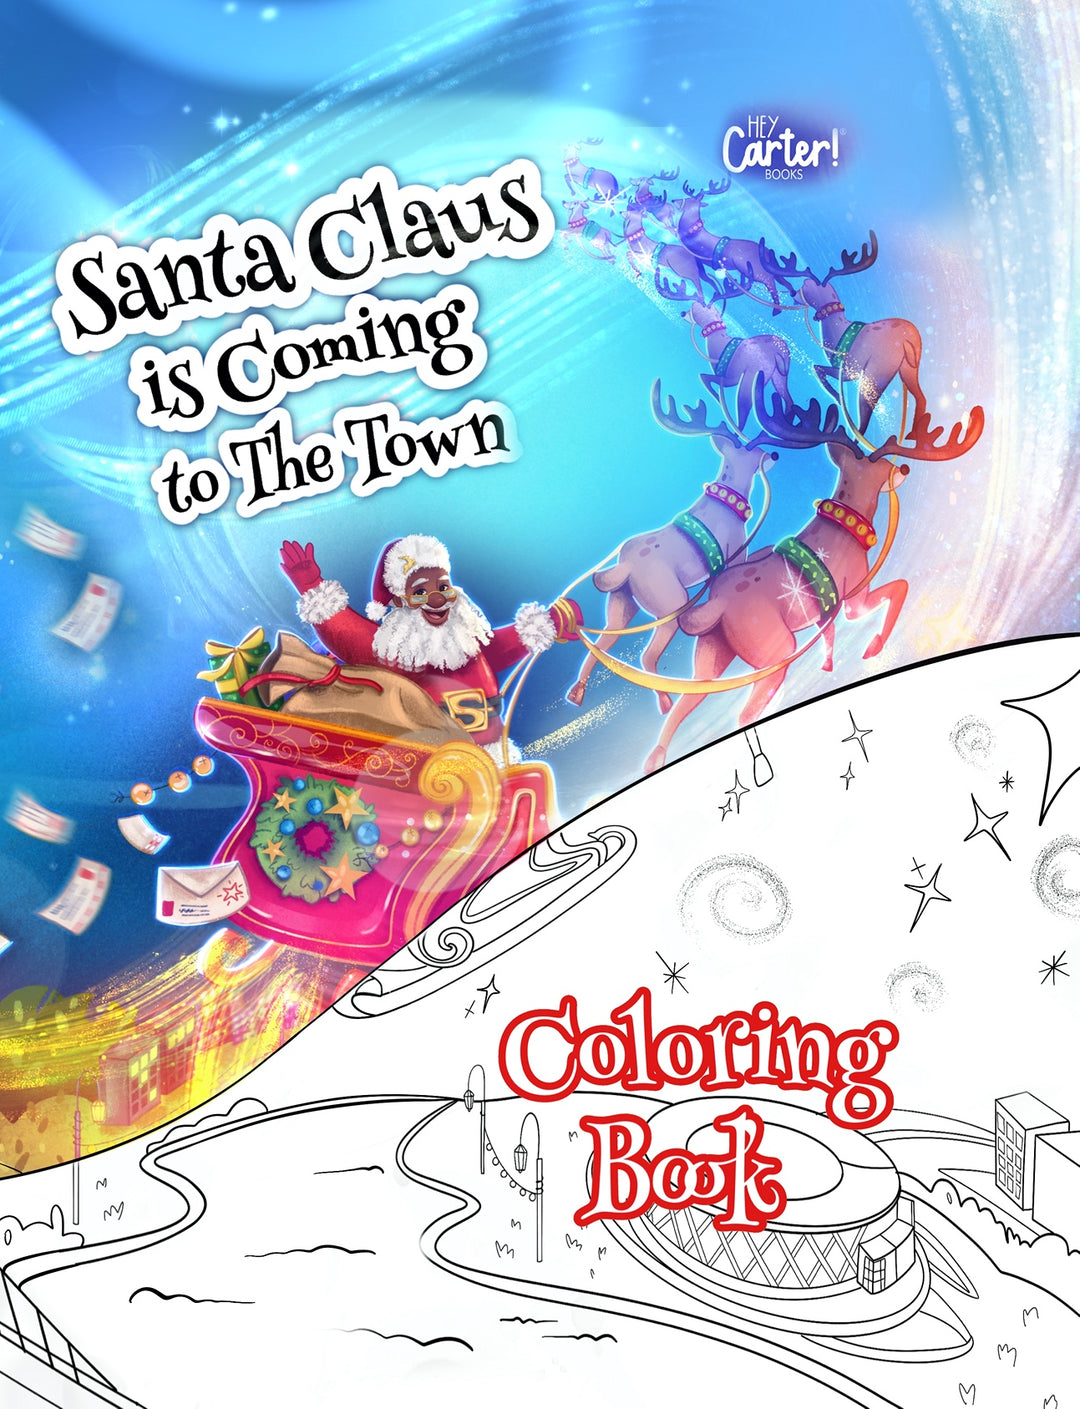 SANTA CLAUS IS COMING TO THE TOWN COLORING BOOK